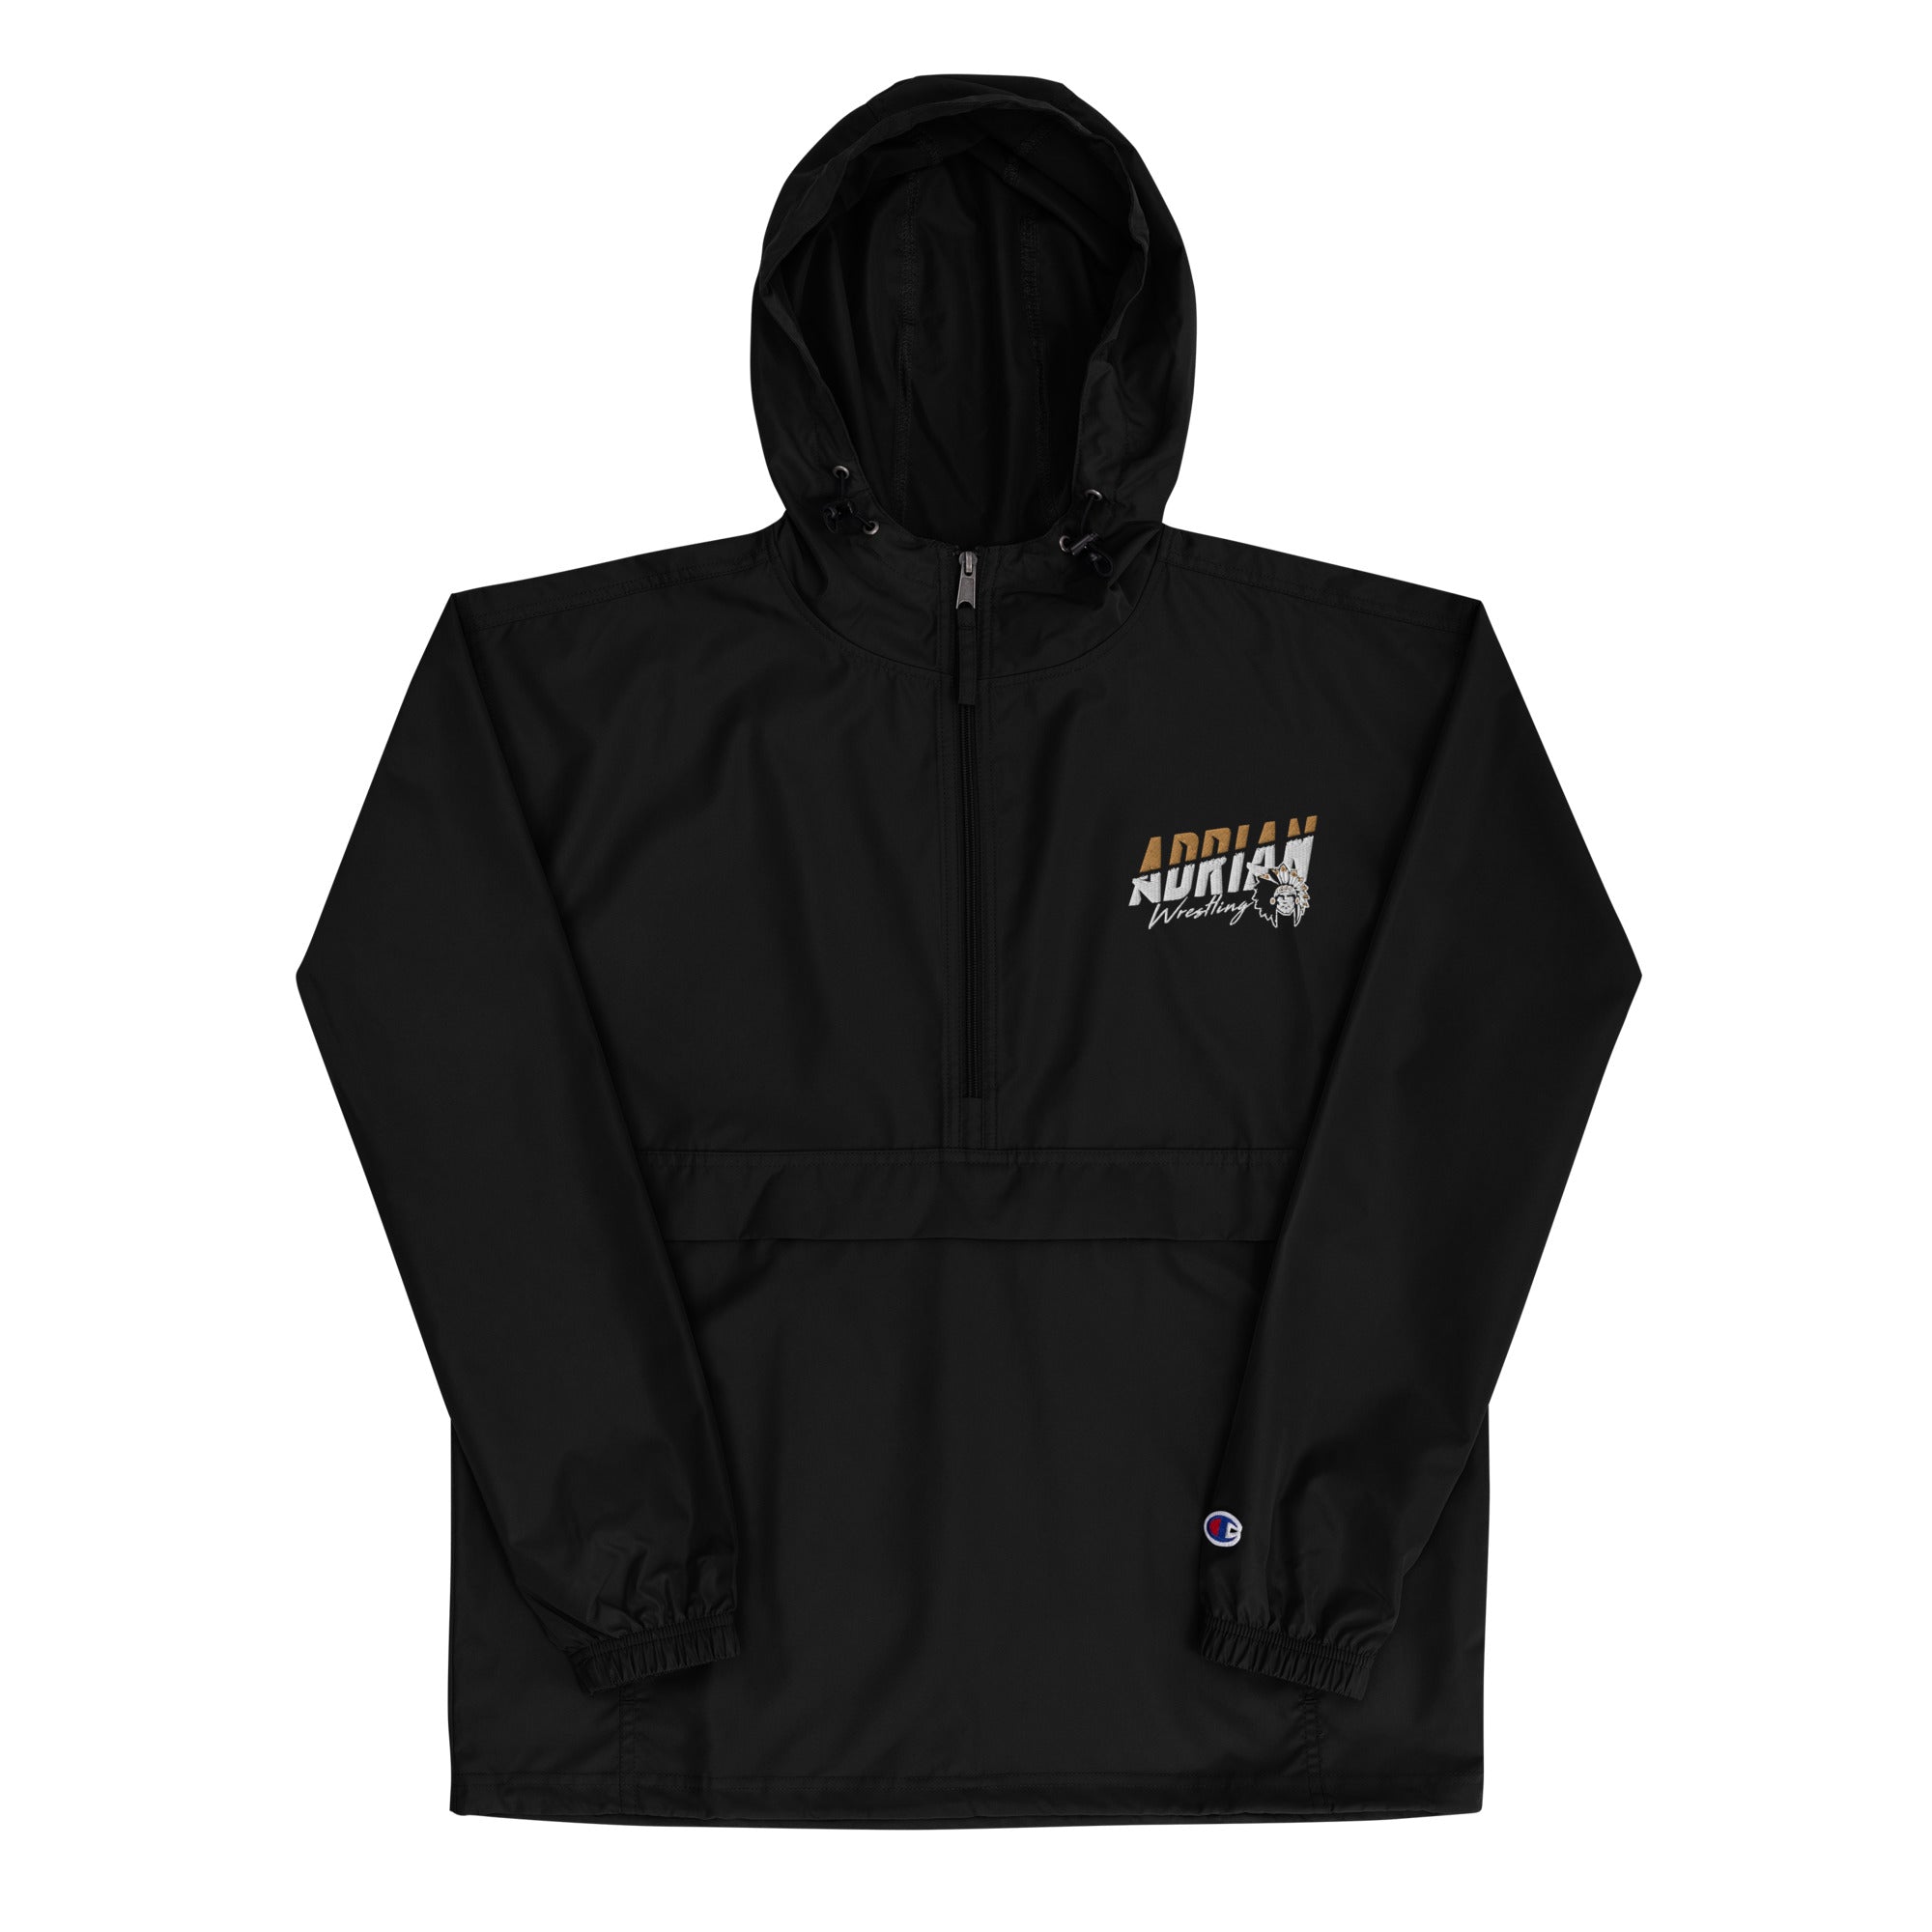 Adrian Wrestling  Embroidered Champion Packable Jacket